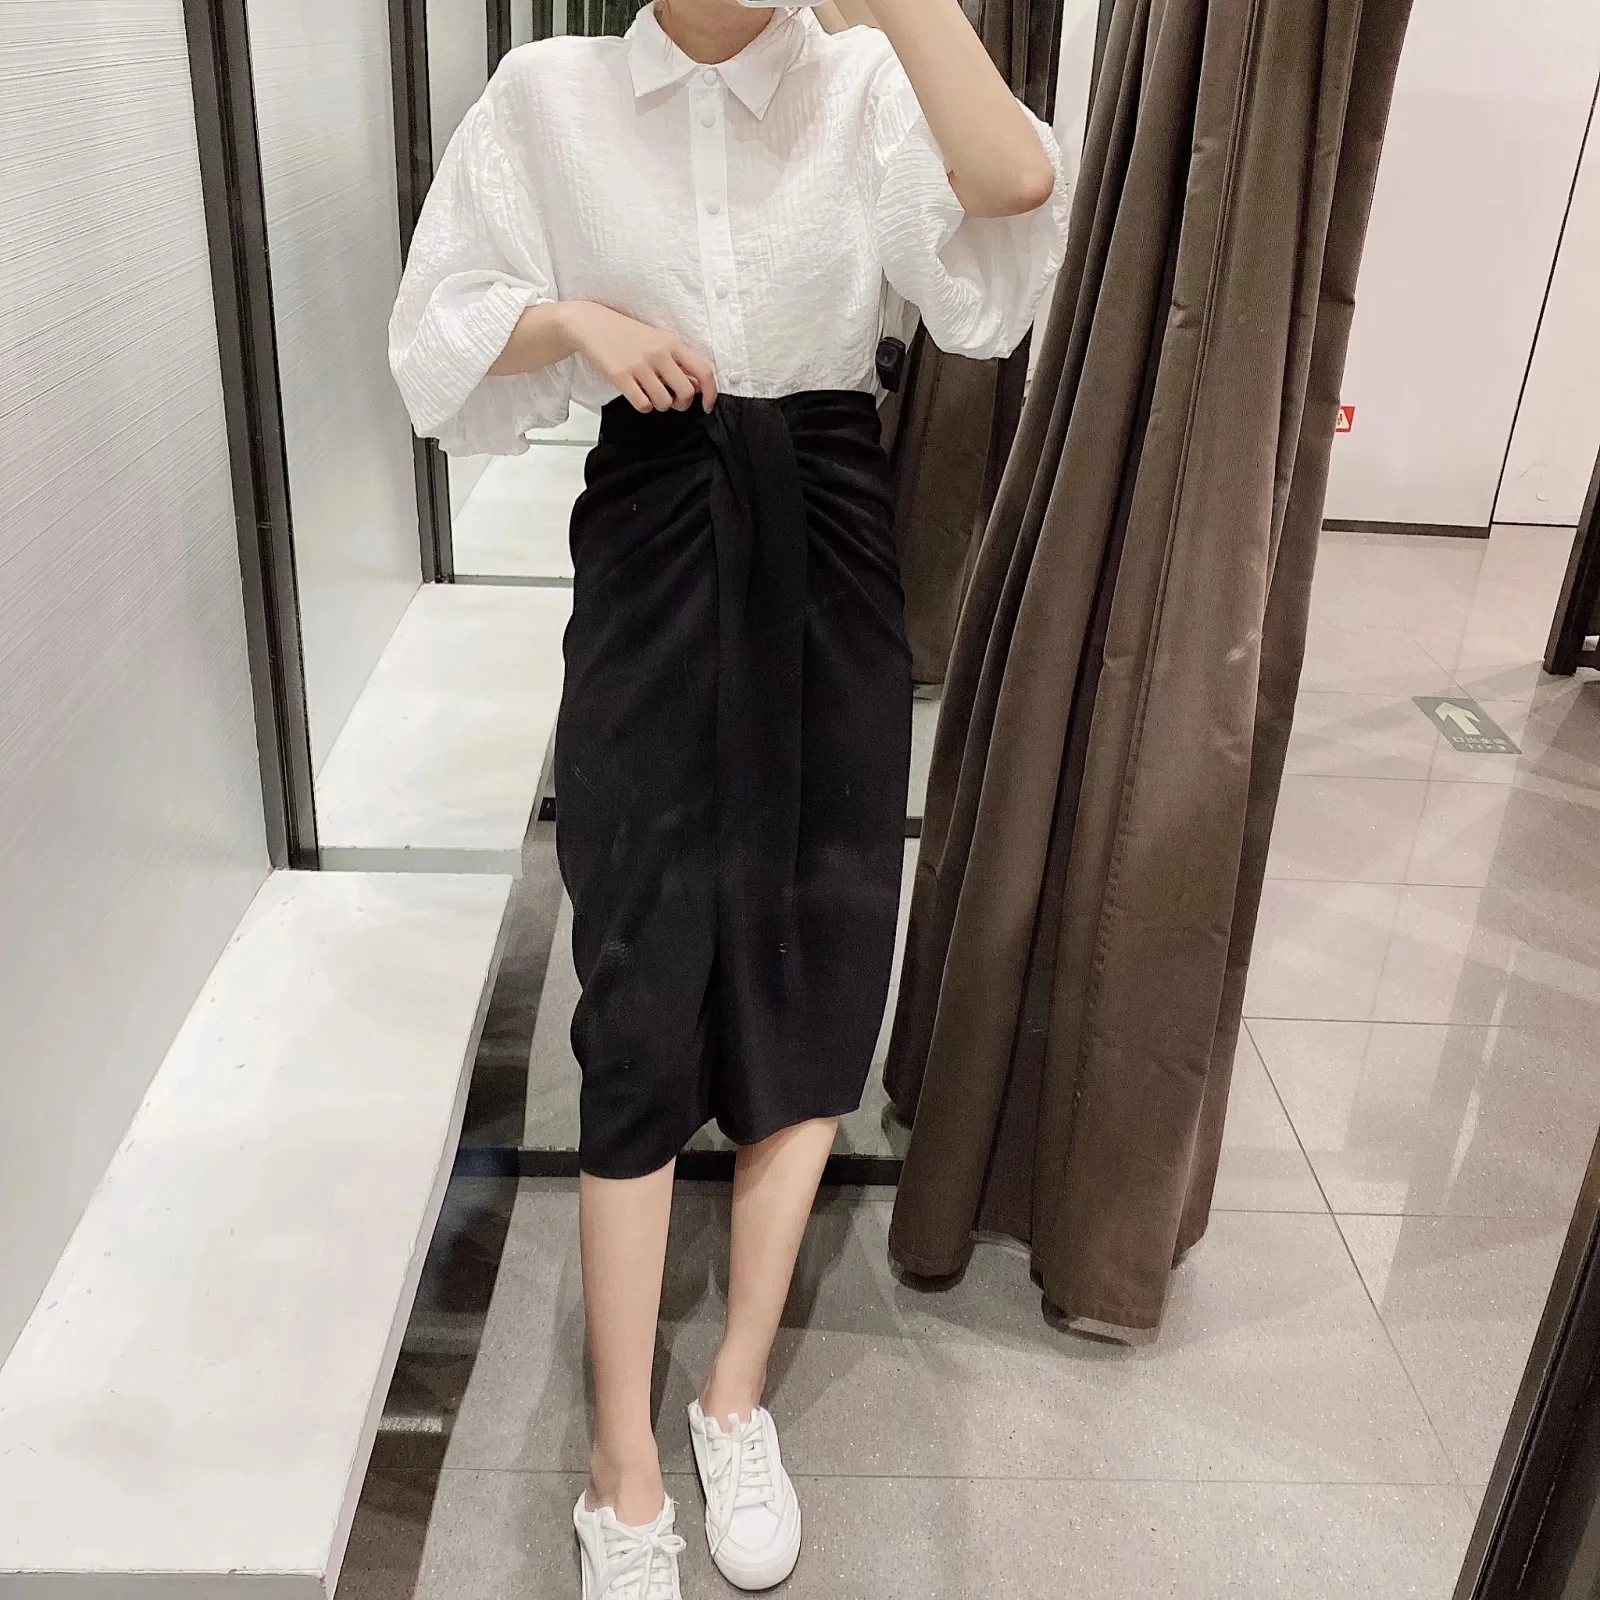 

Simple Solid Color High Waist A-line Midi Skirt Female New Fashion All-match Casual Slit Mid-calf Black Skirt Women Sexy Wear